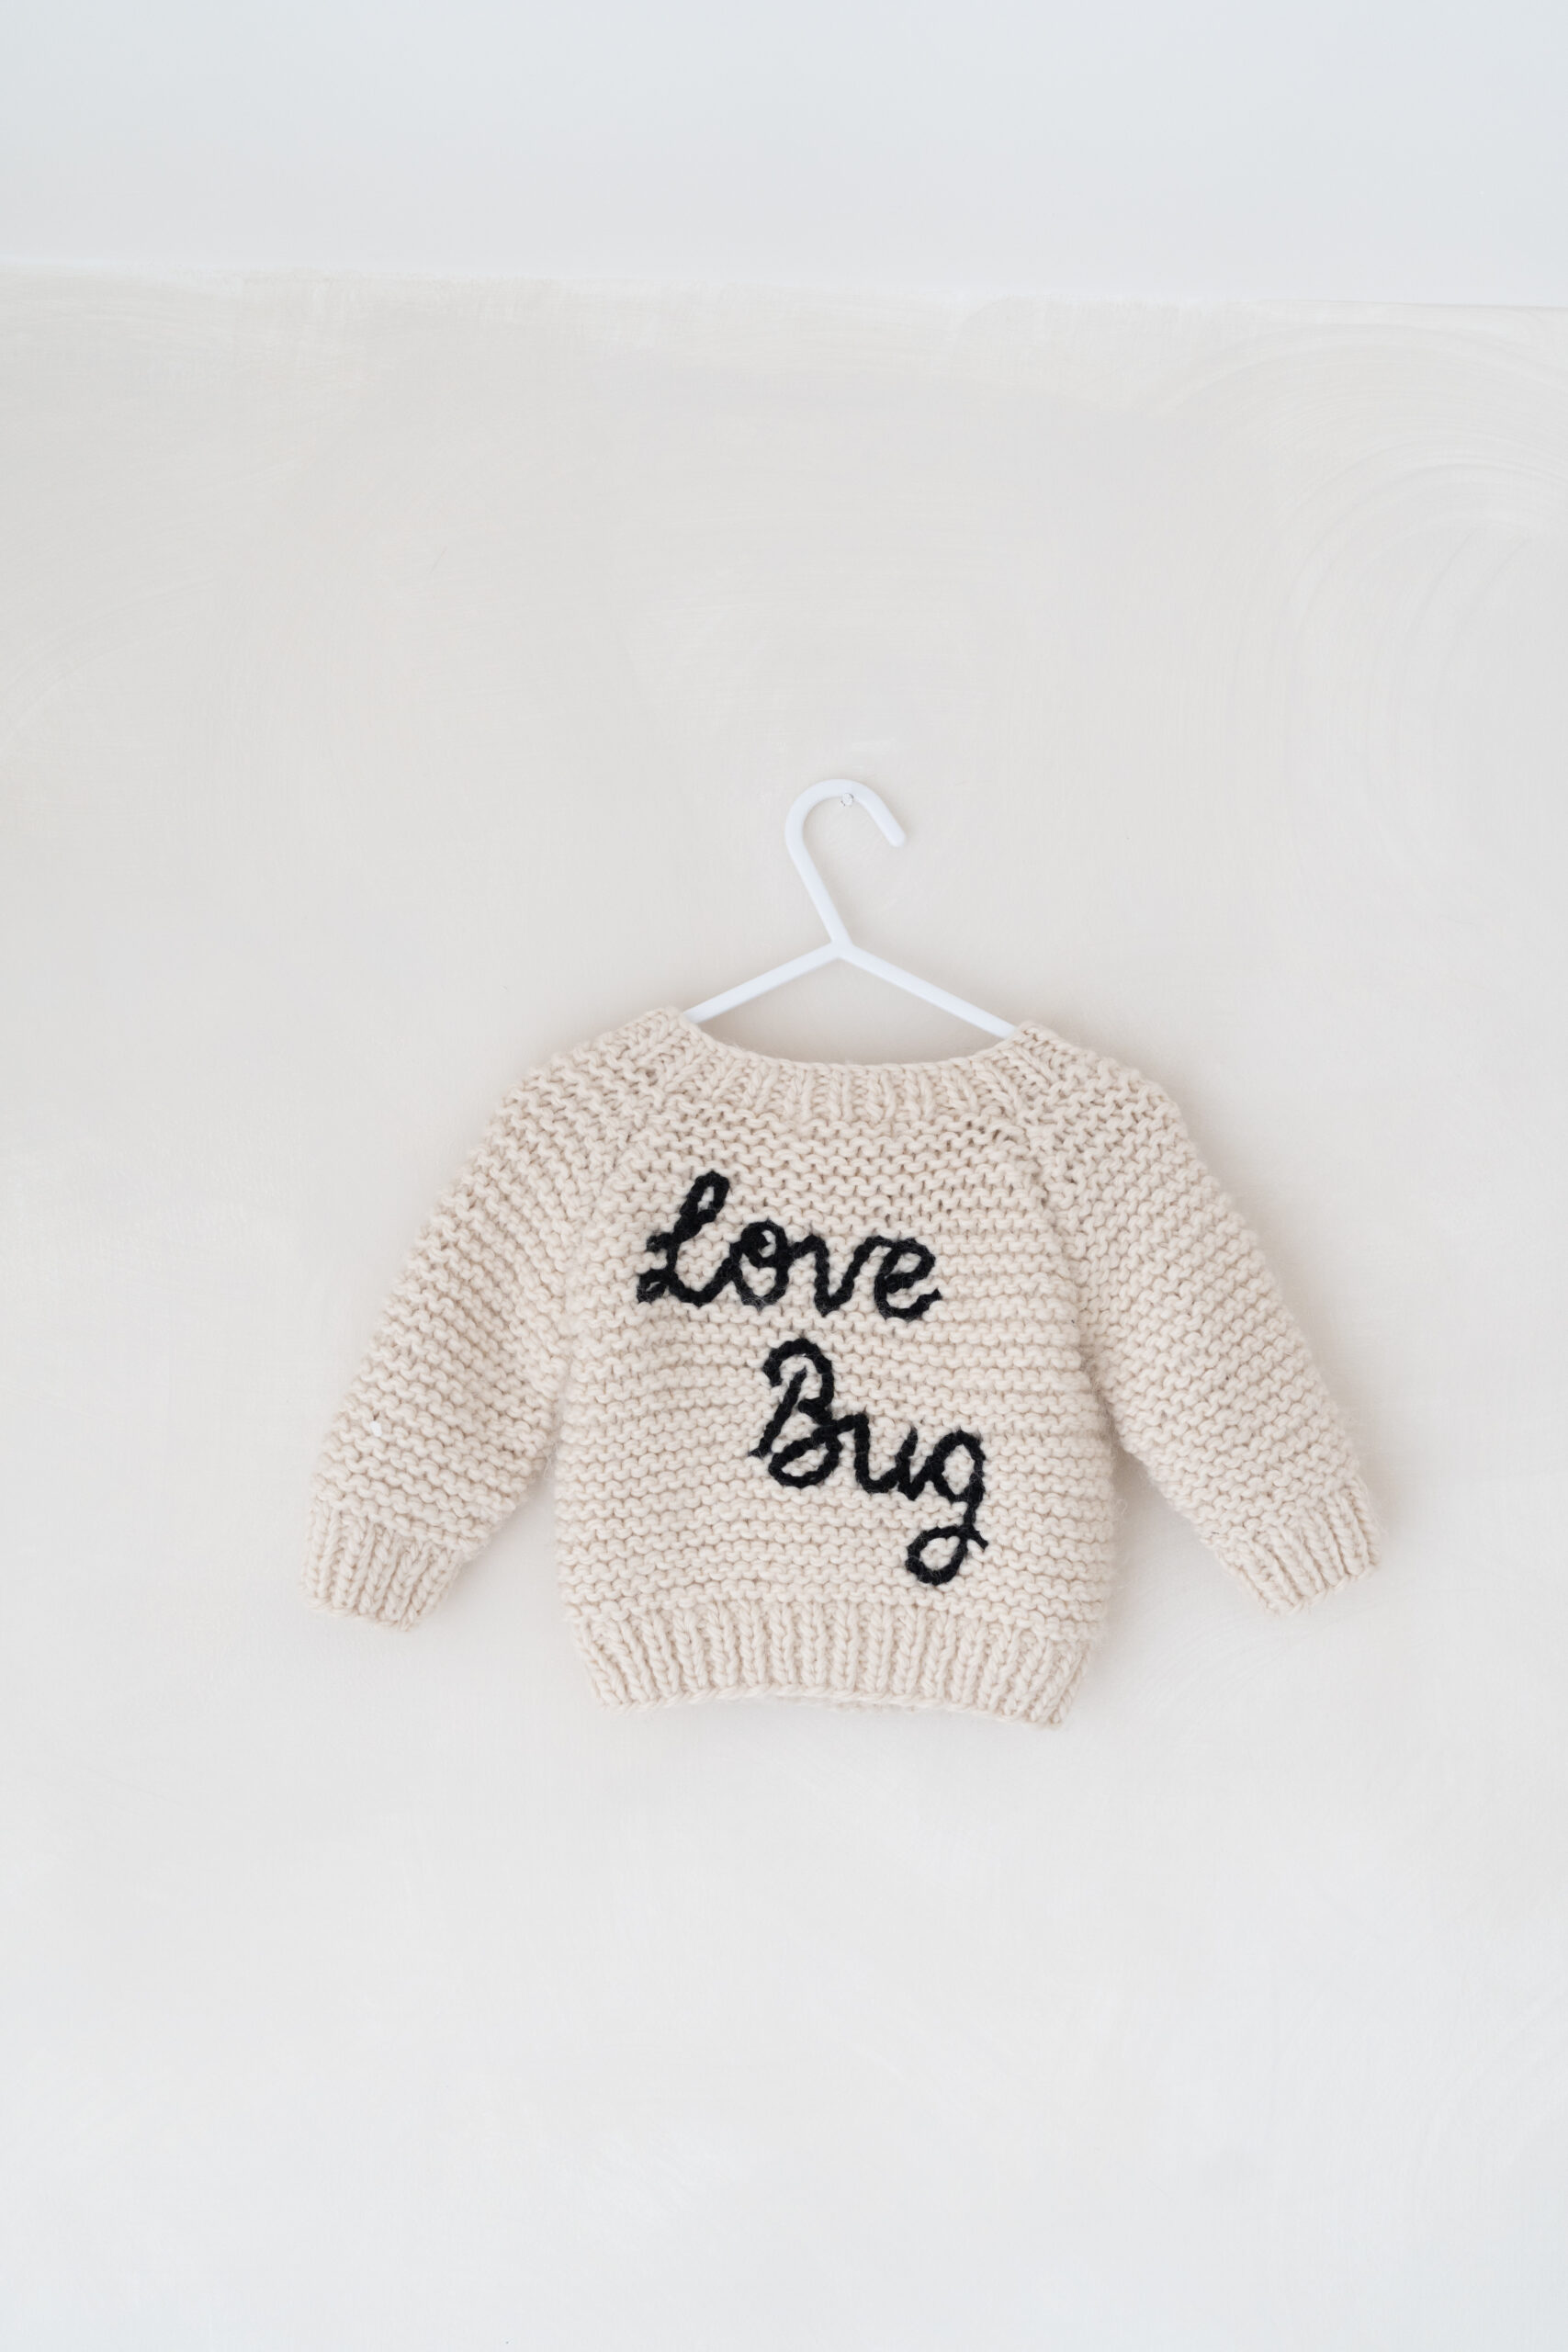 Knitted Love Bug jumper in my newborn photography studio in Cheshire.